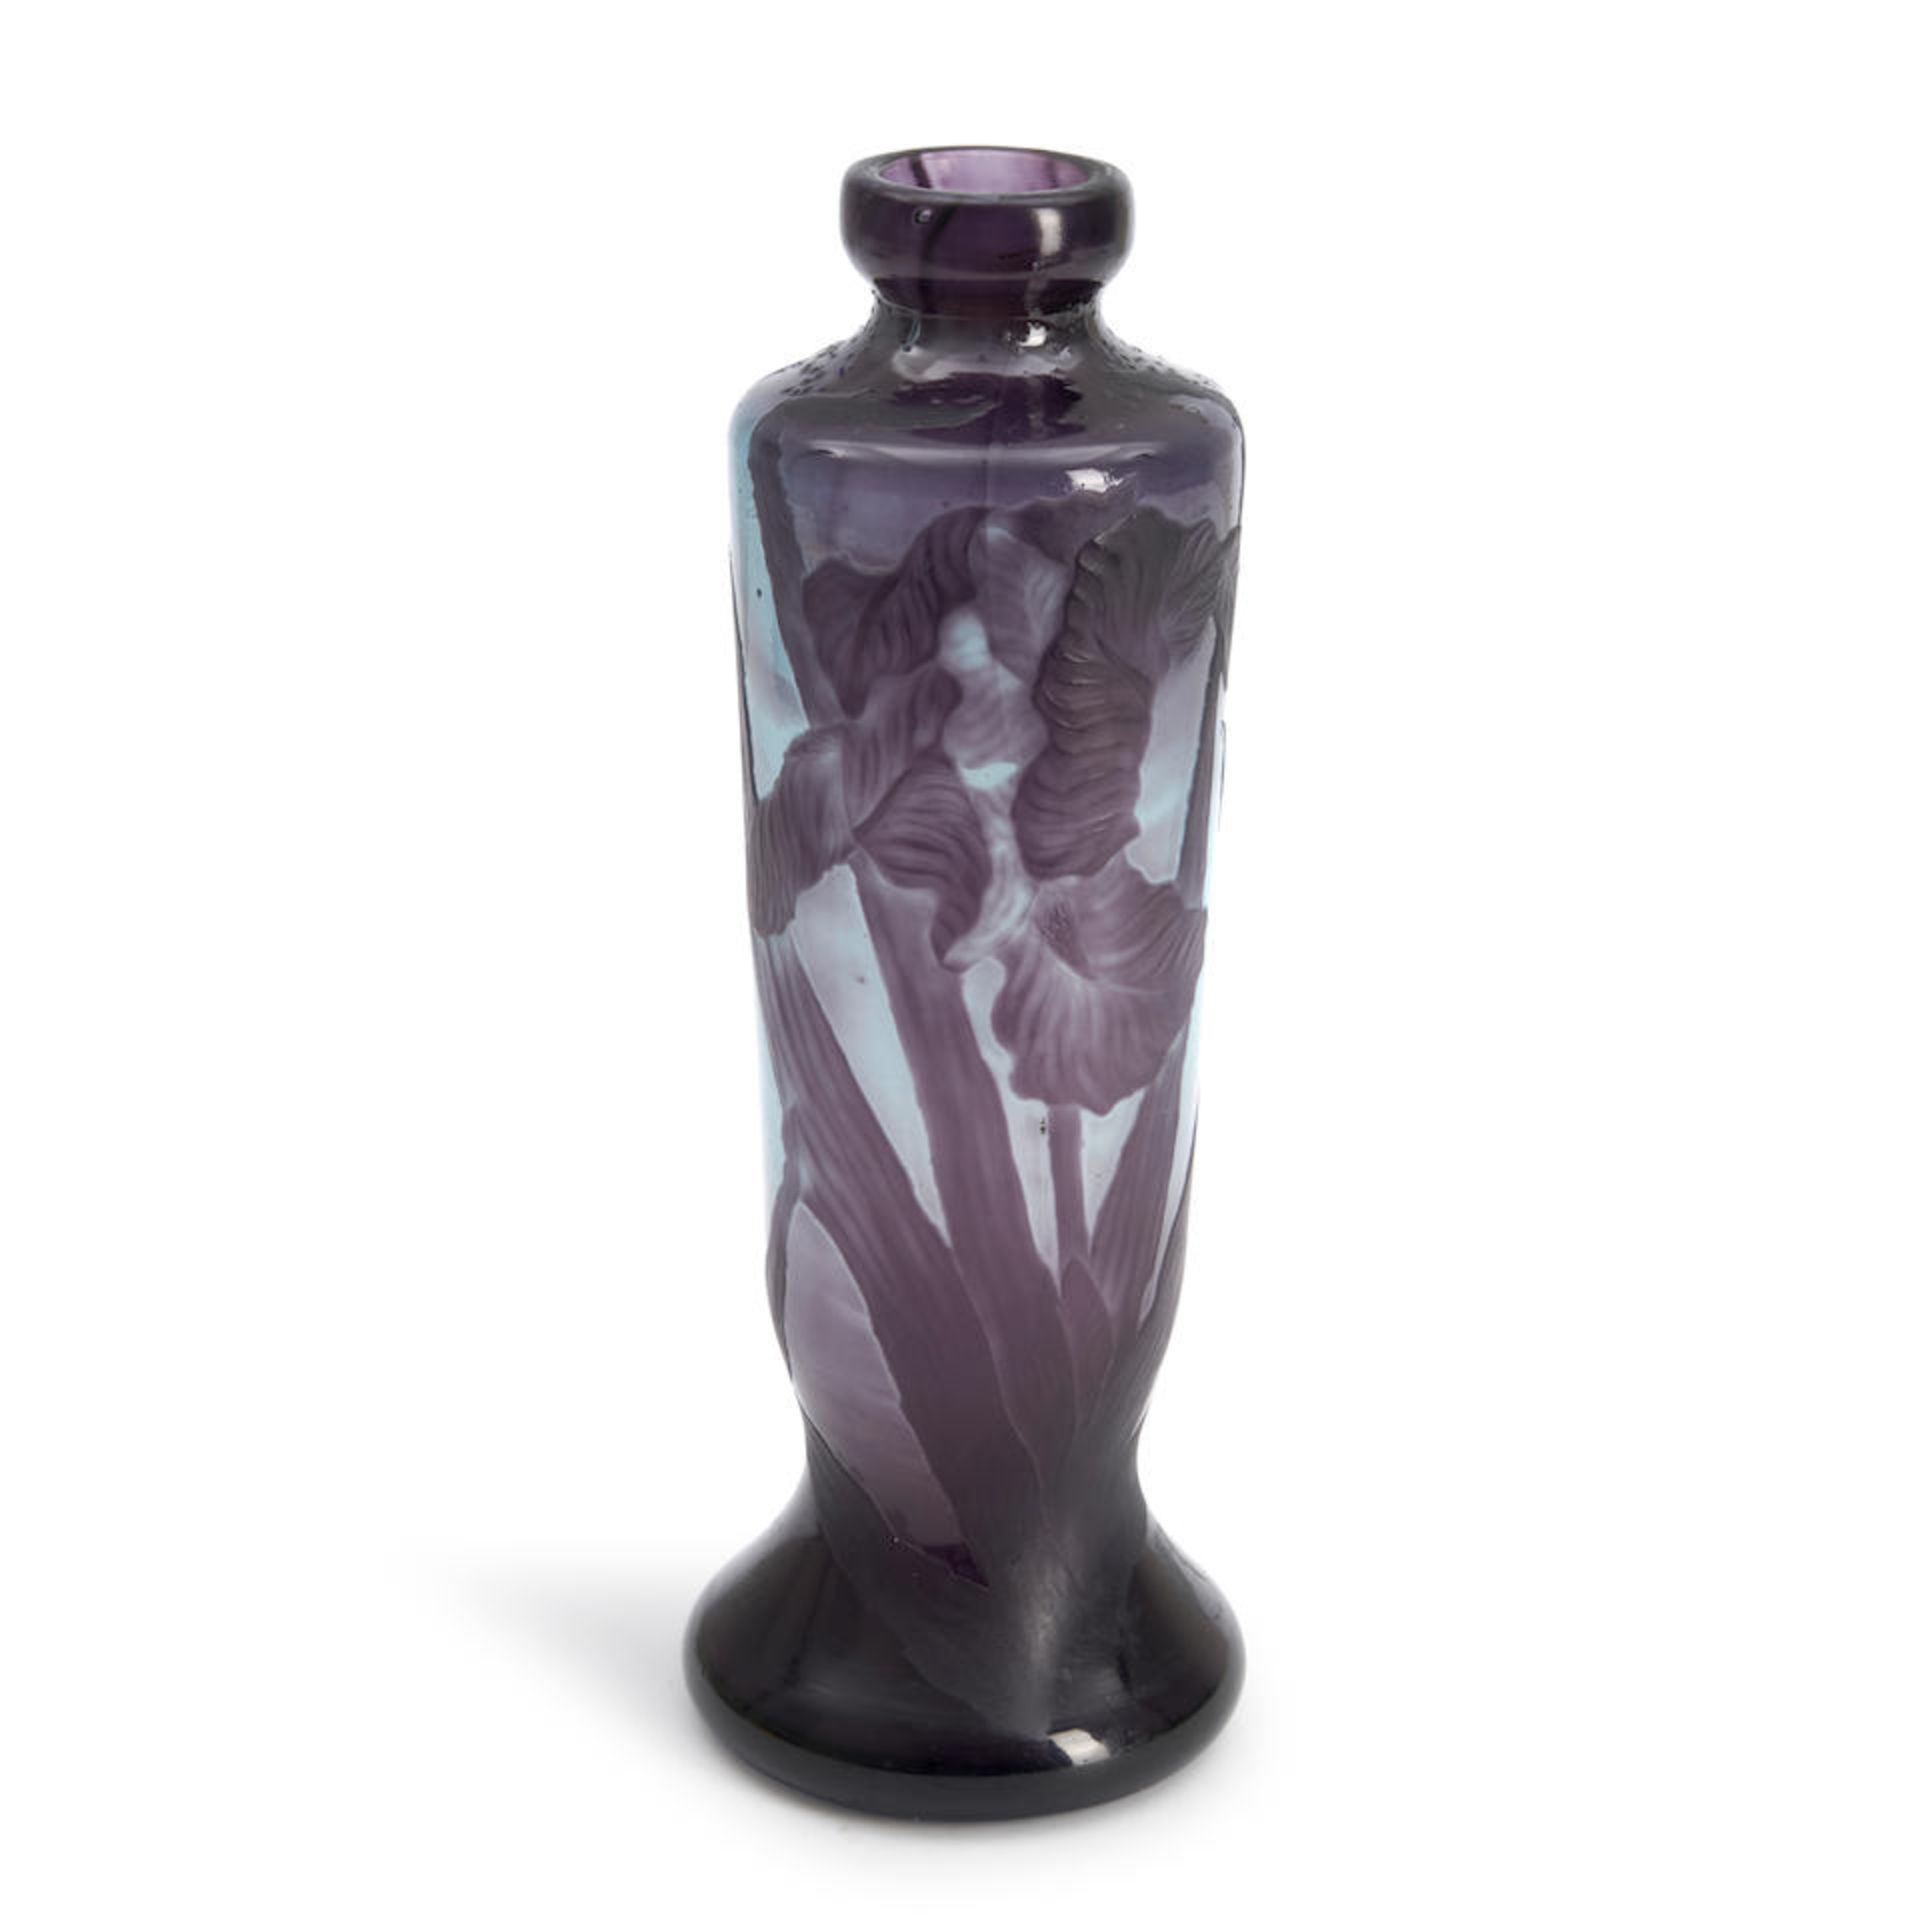 MULLER FRERES CAMEO GLASS VASE WITH IRISES, Croismare, France, c. 1910, cameo mark 'Muller Crois...